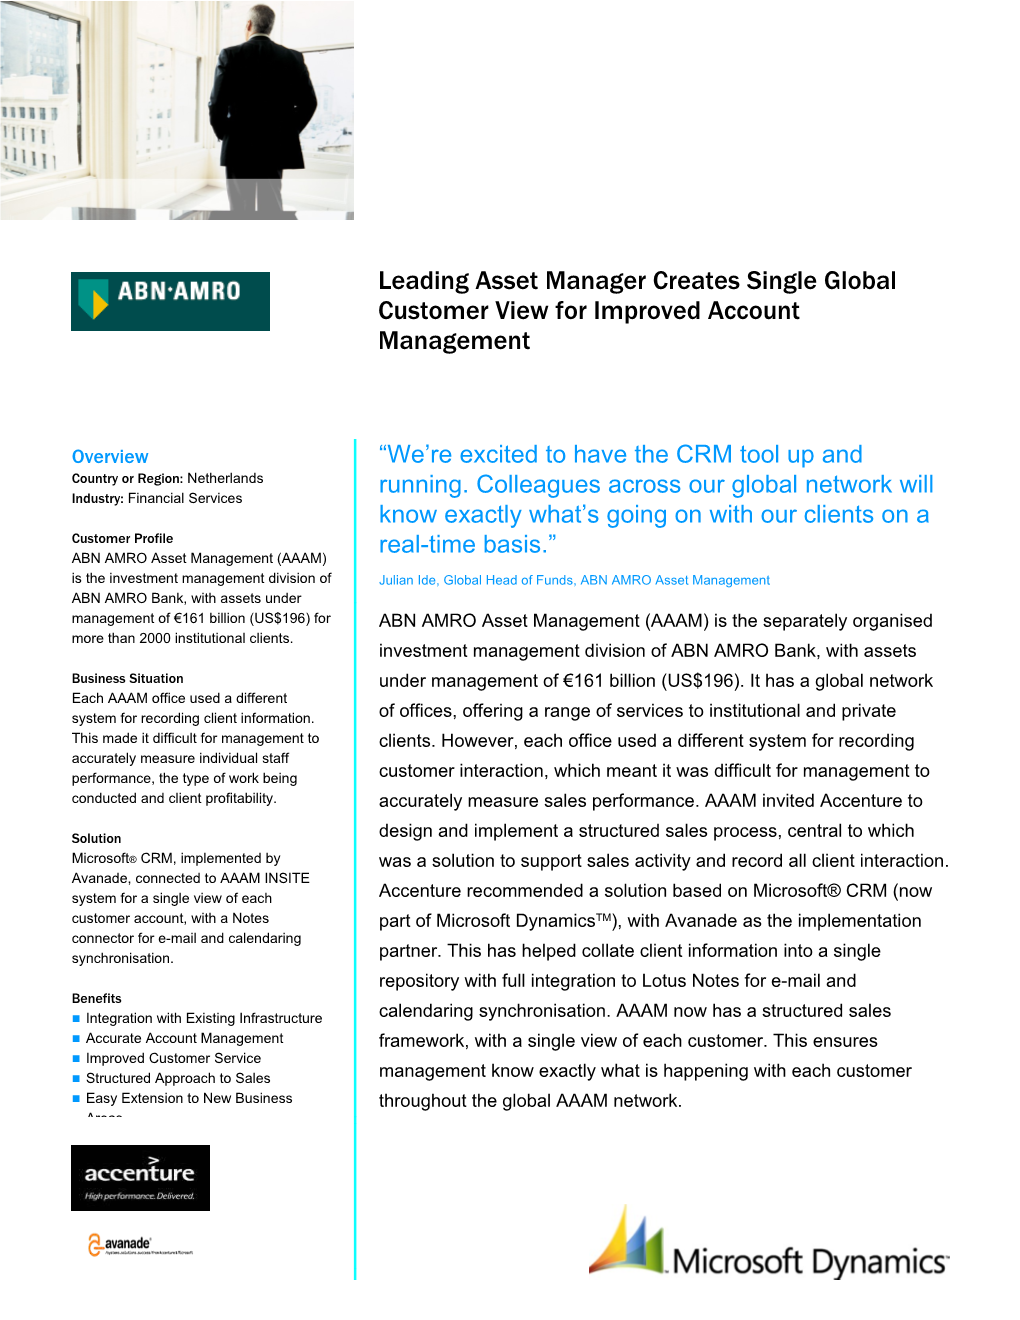 Leading Asset Manager Creates Single Global Customer View for Improved Account Management